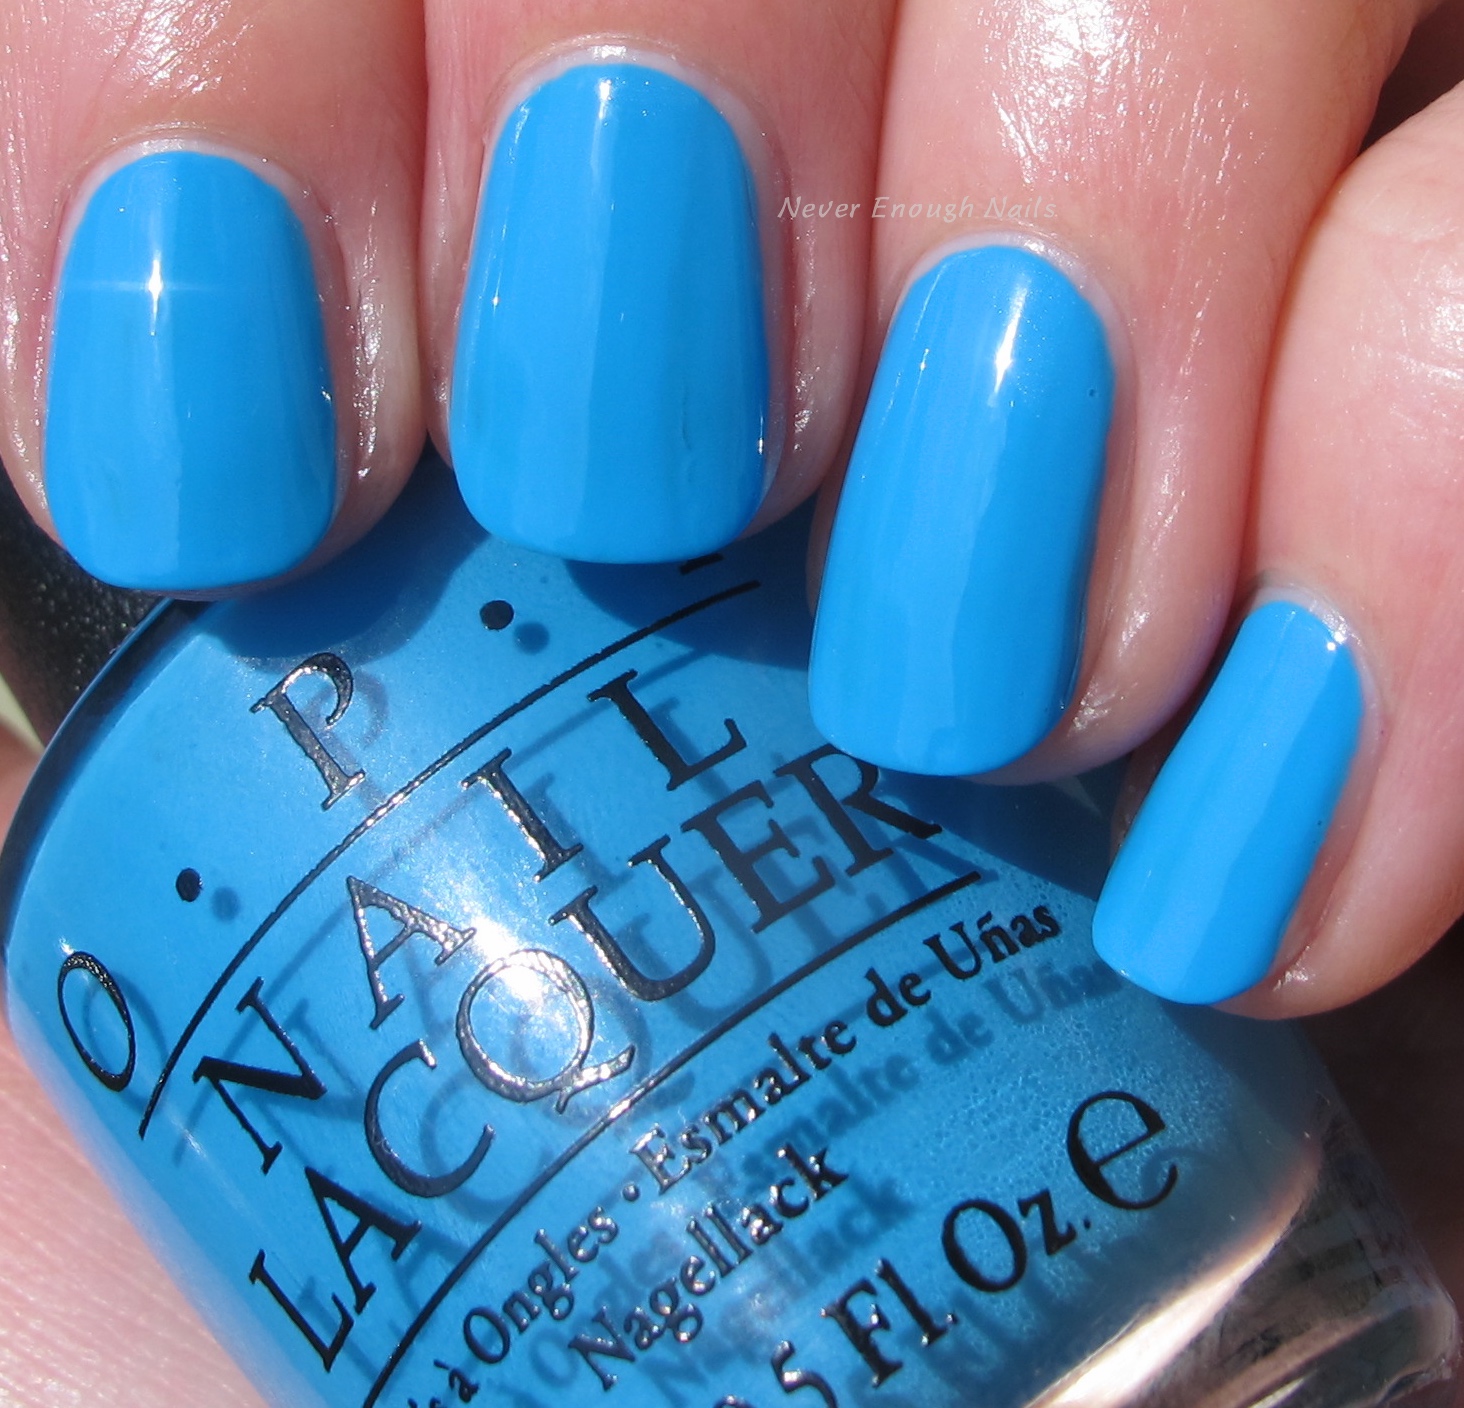 Never Enough Nails: OPI Disney Alice Through the Looking Glass Swatches!!